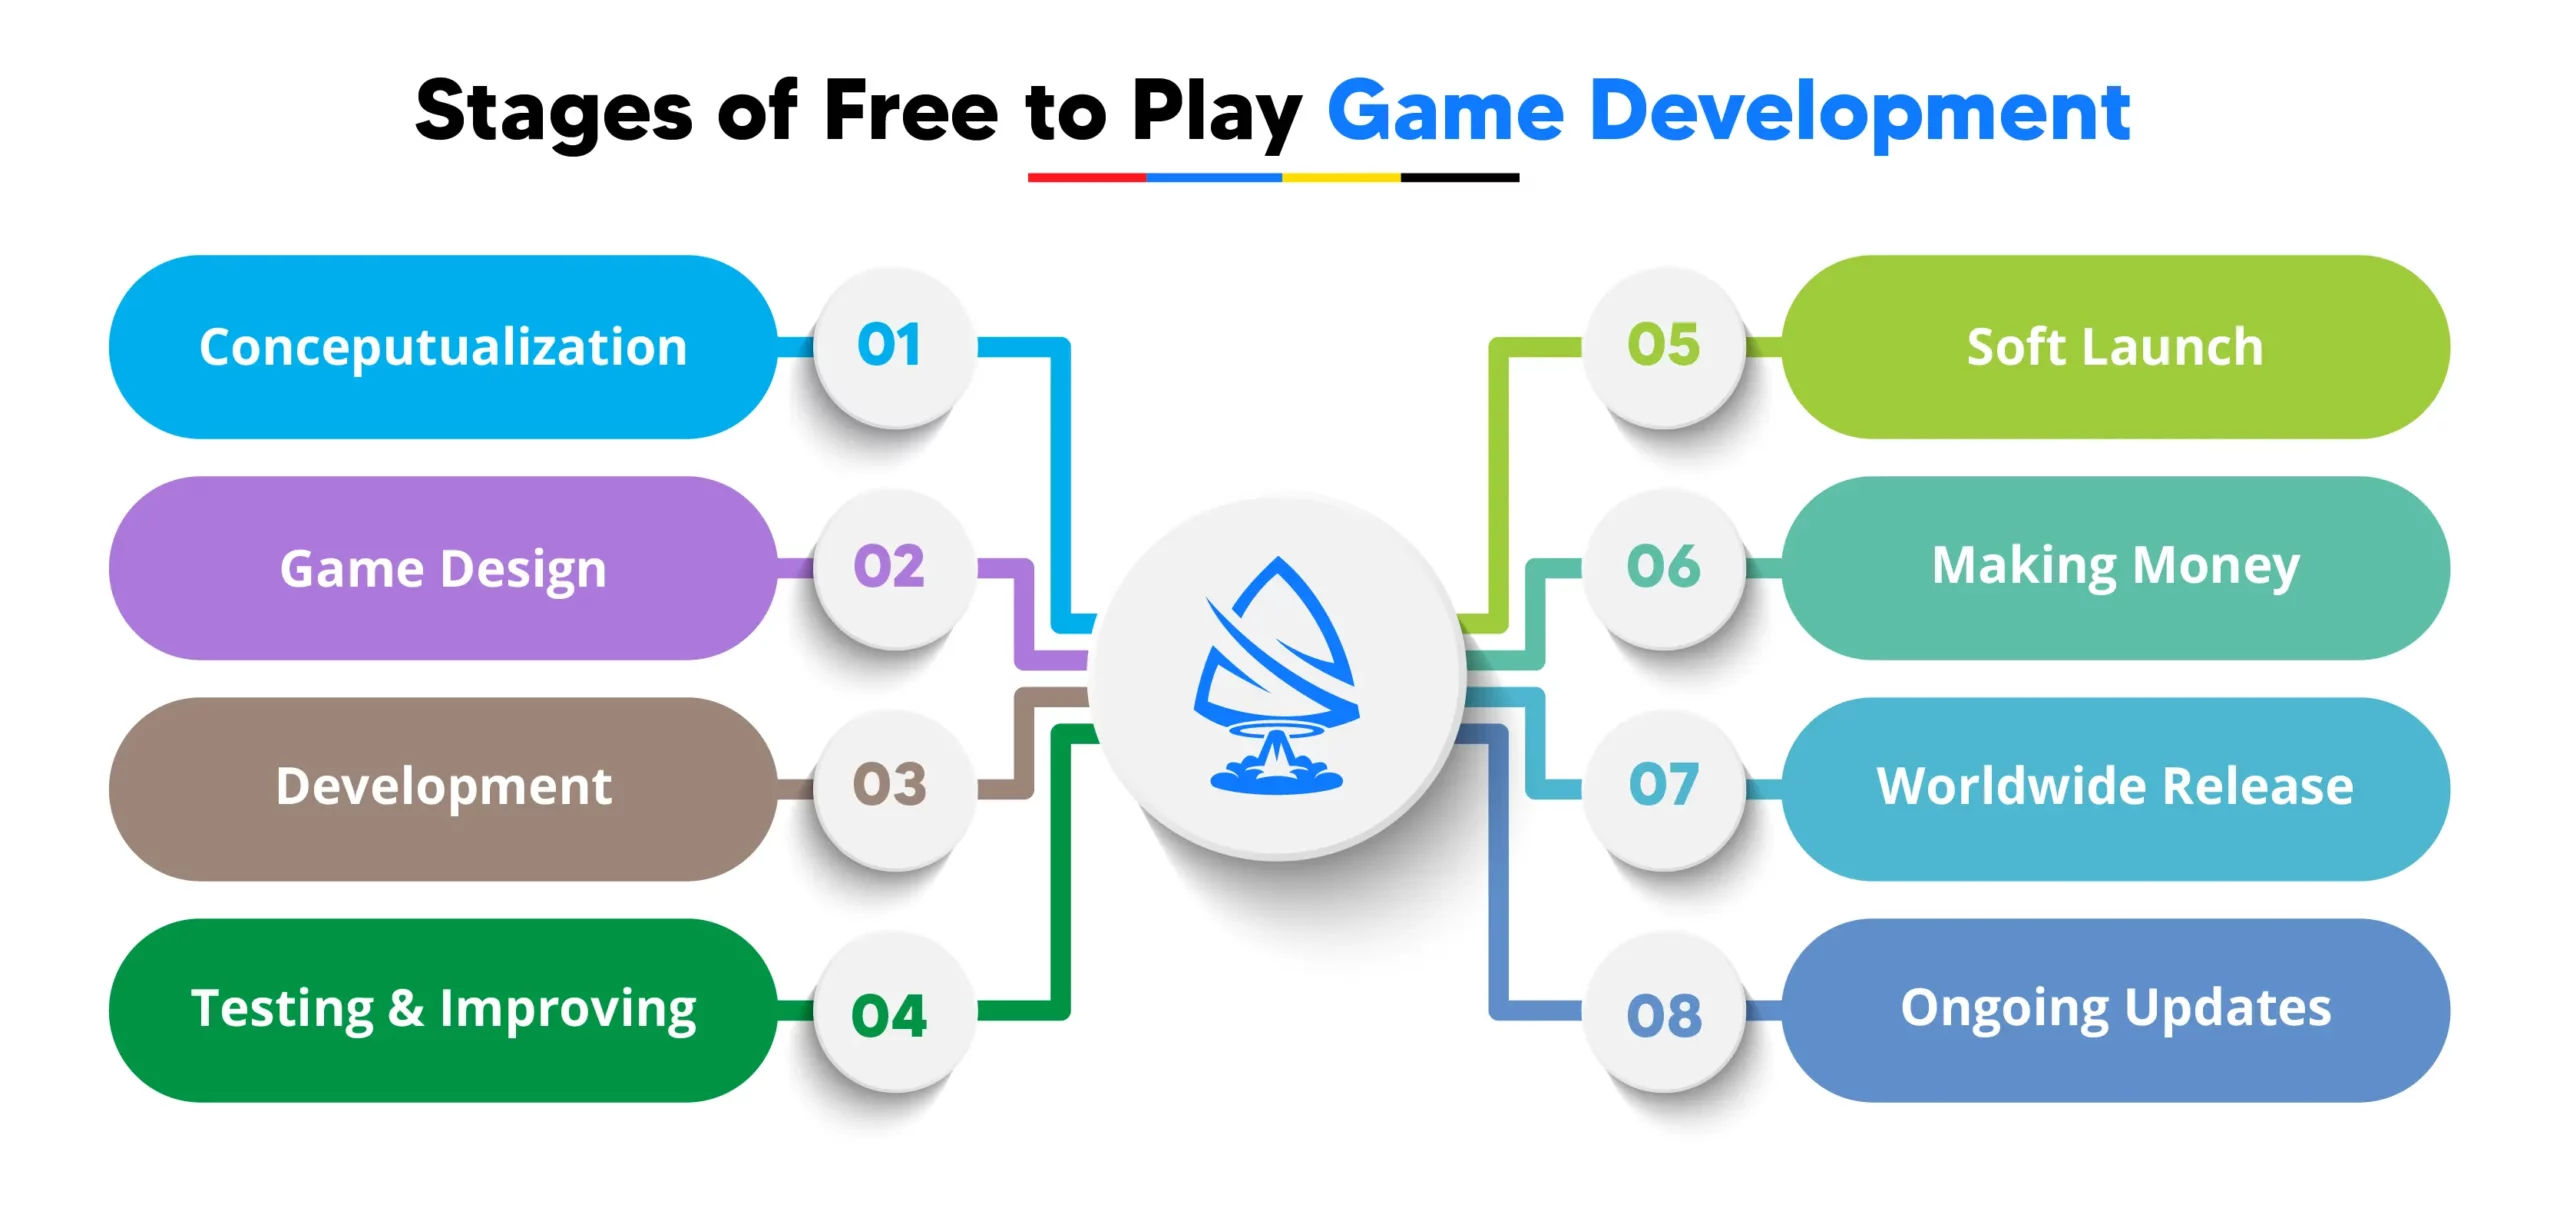 Stages of Free to Play Game Development